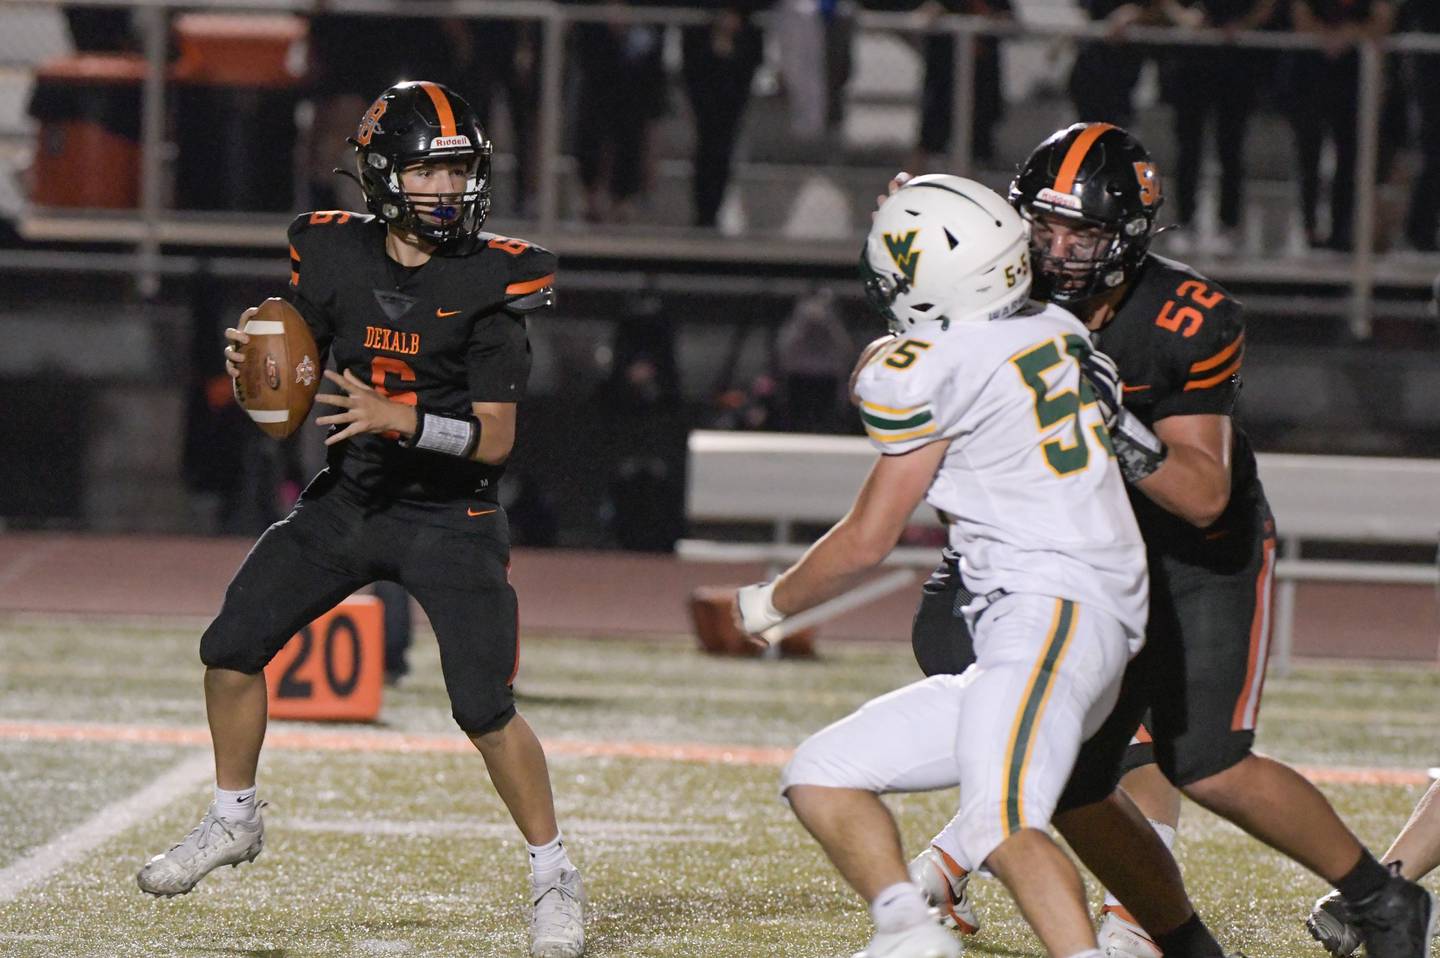 DeKalb's quarterback Joshua Klemm (6) looks for an open receiver against Waubonsie during a game in DeKalb on Friday, Oct. 1, 2021.